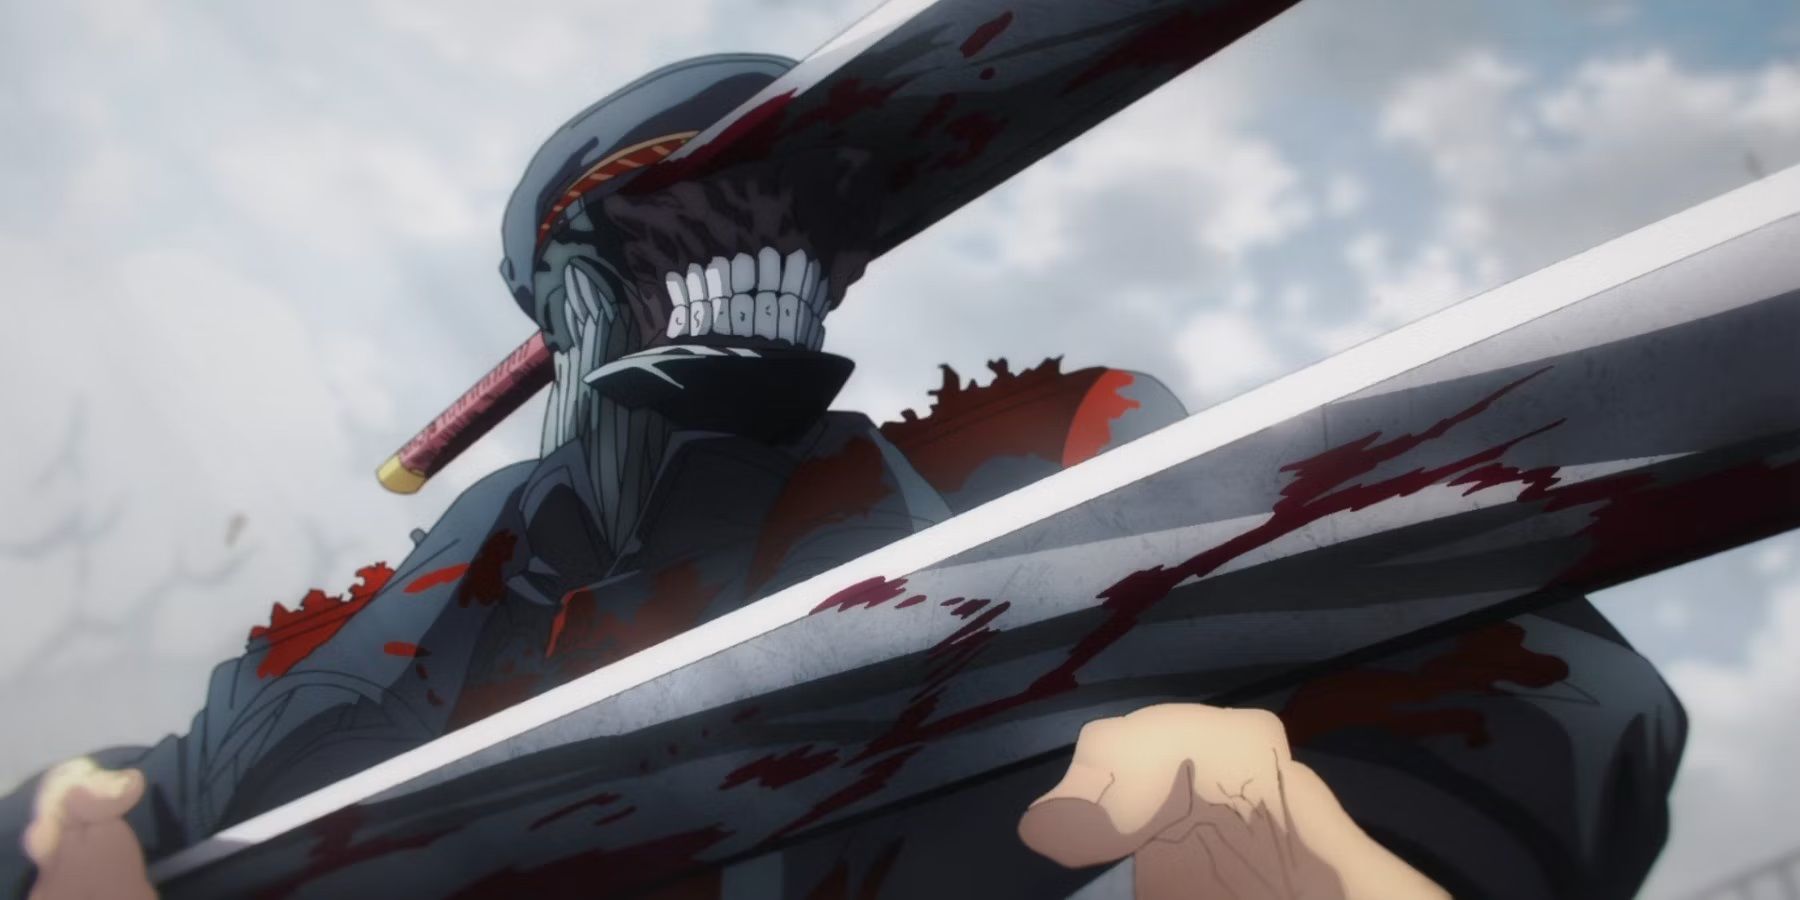 Best Chainsaw Man Fights in Season 1, Ranked